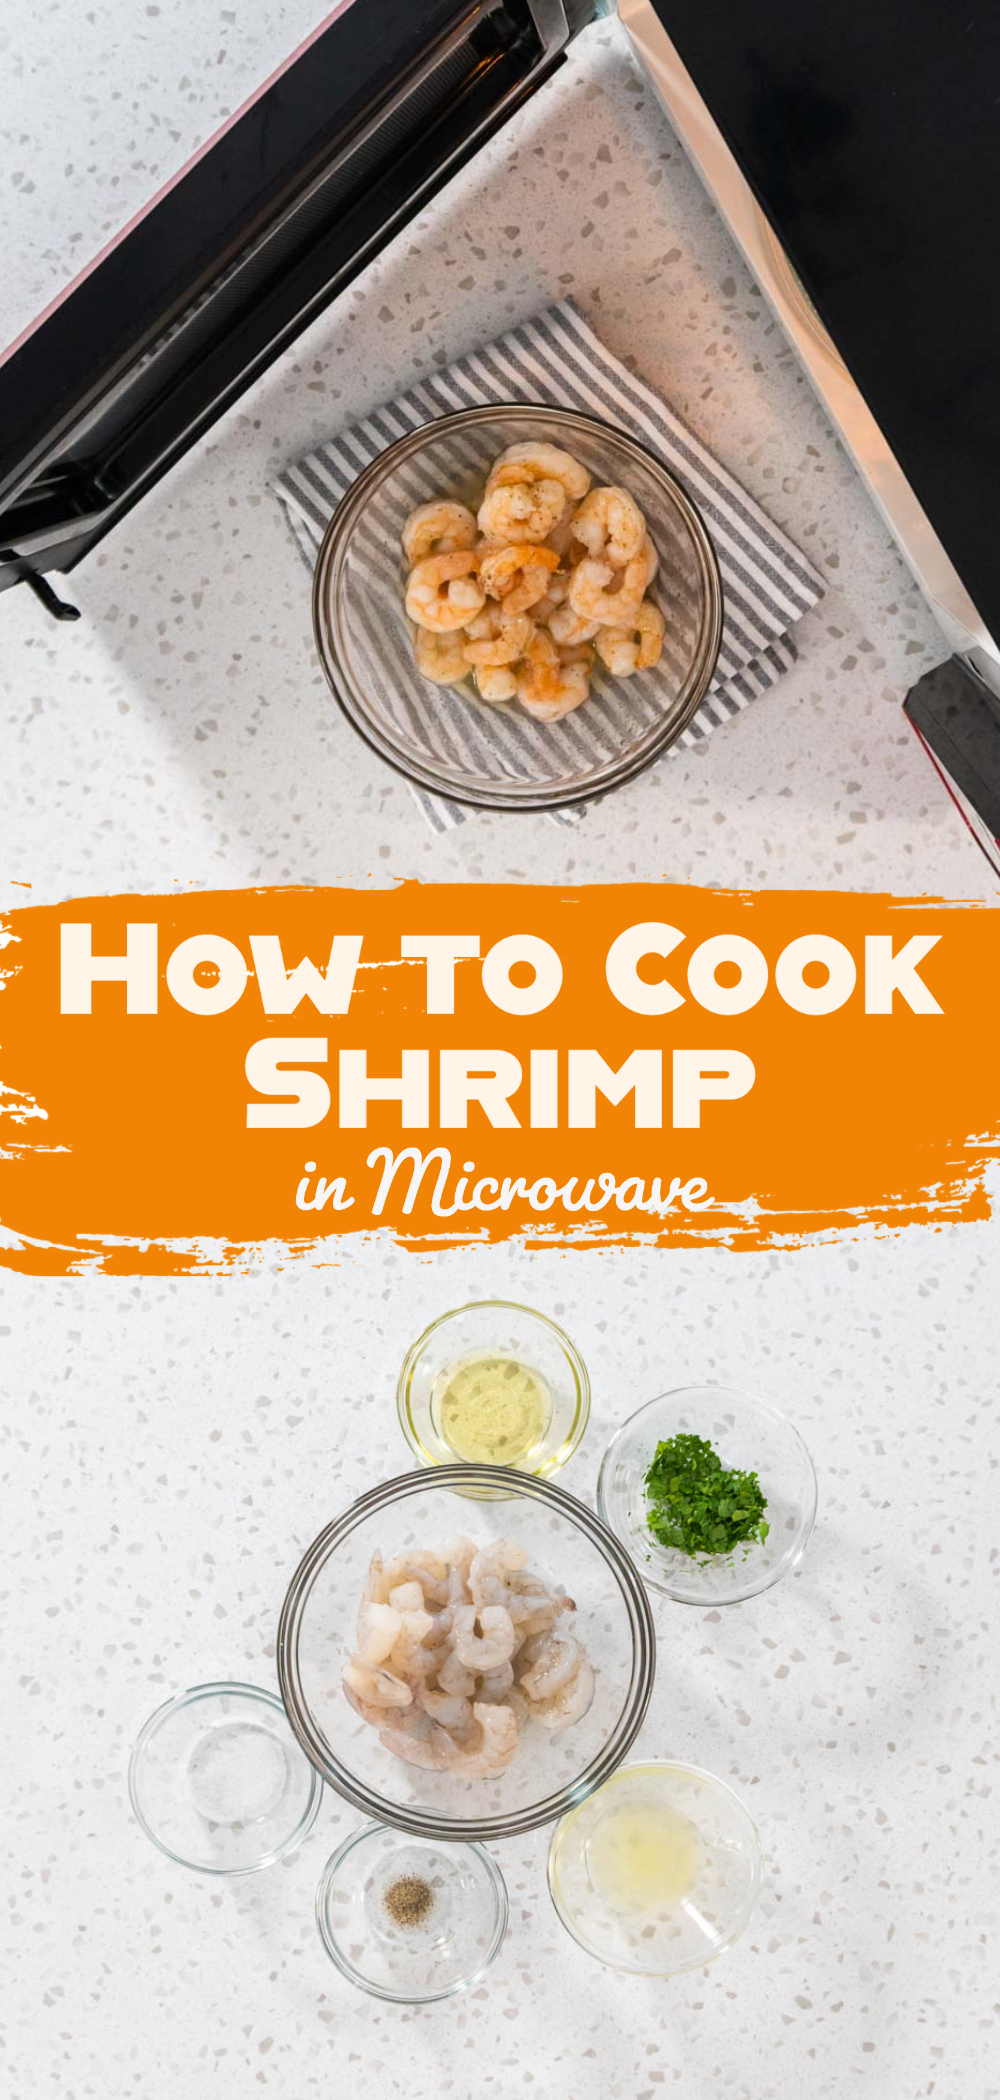 How to Cook Shrimp in Microwave